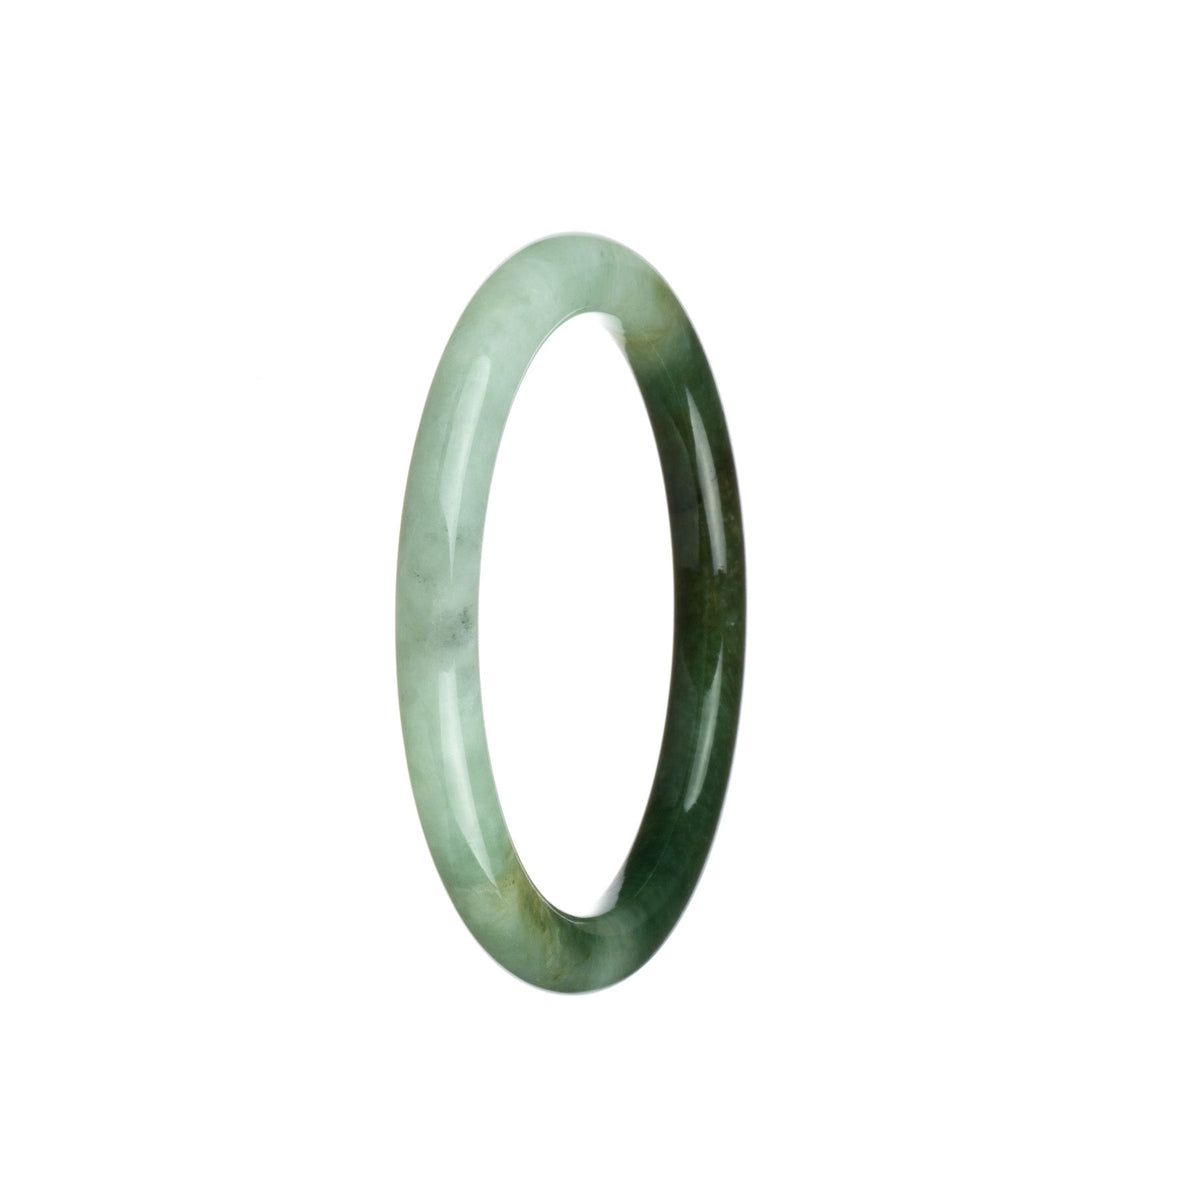 A close-up image of a petite round dark green jade bangle with hints of pale green.